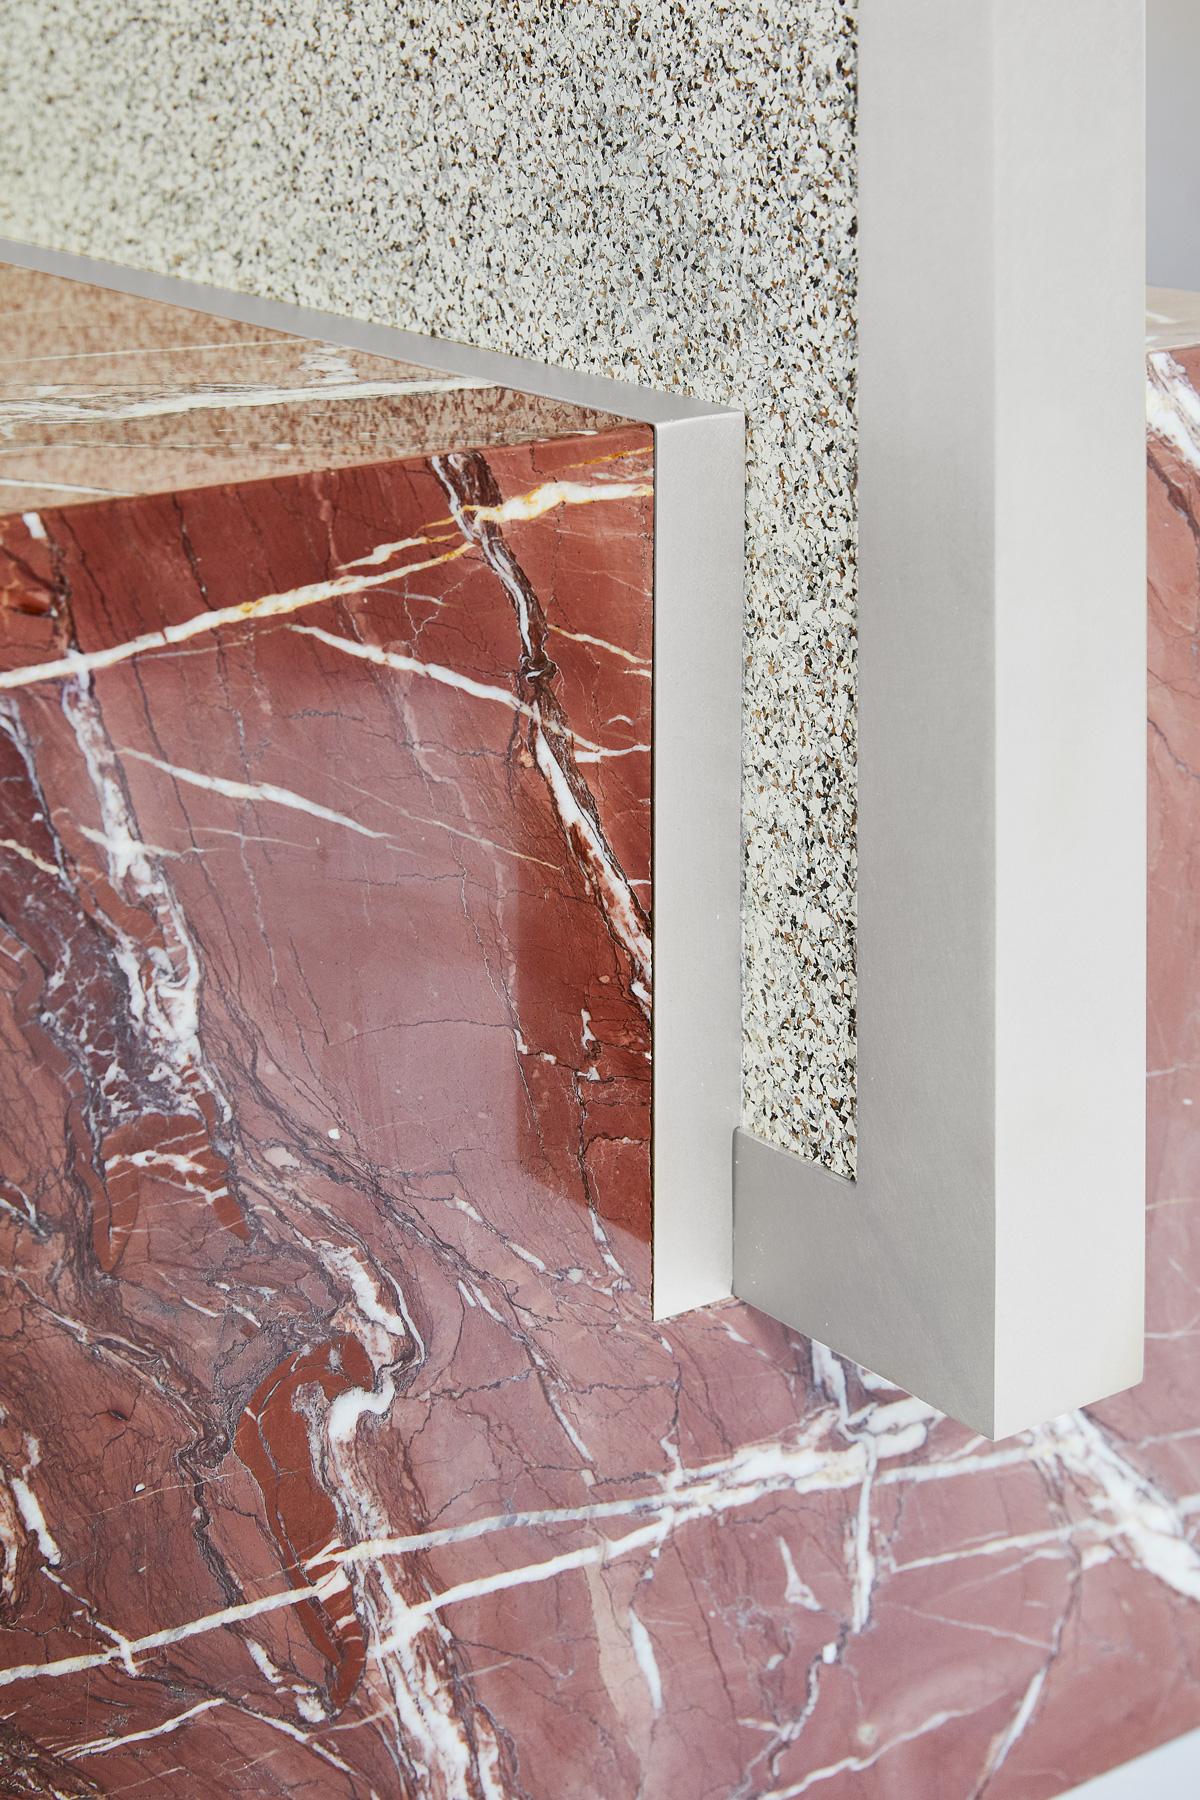 The coexist standing mirror consists of a red jasper marble cube base, brushed nickel frame, and recycled rubber backing.

The framed mirror fits into a rich veined marble cube base with precision. The piece is able to be assembled with no hardware